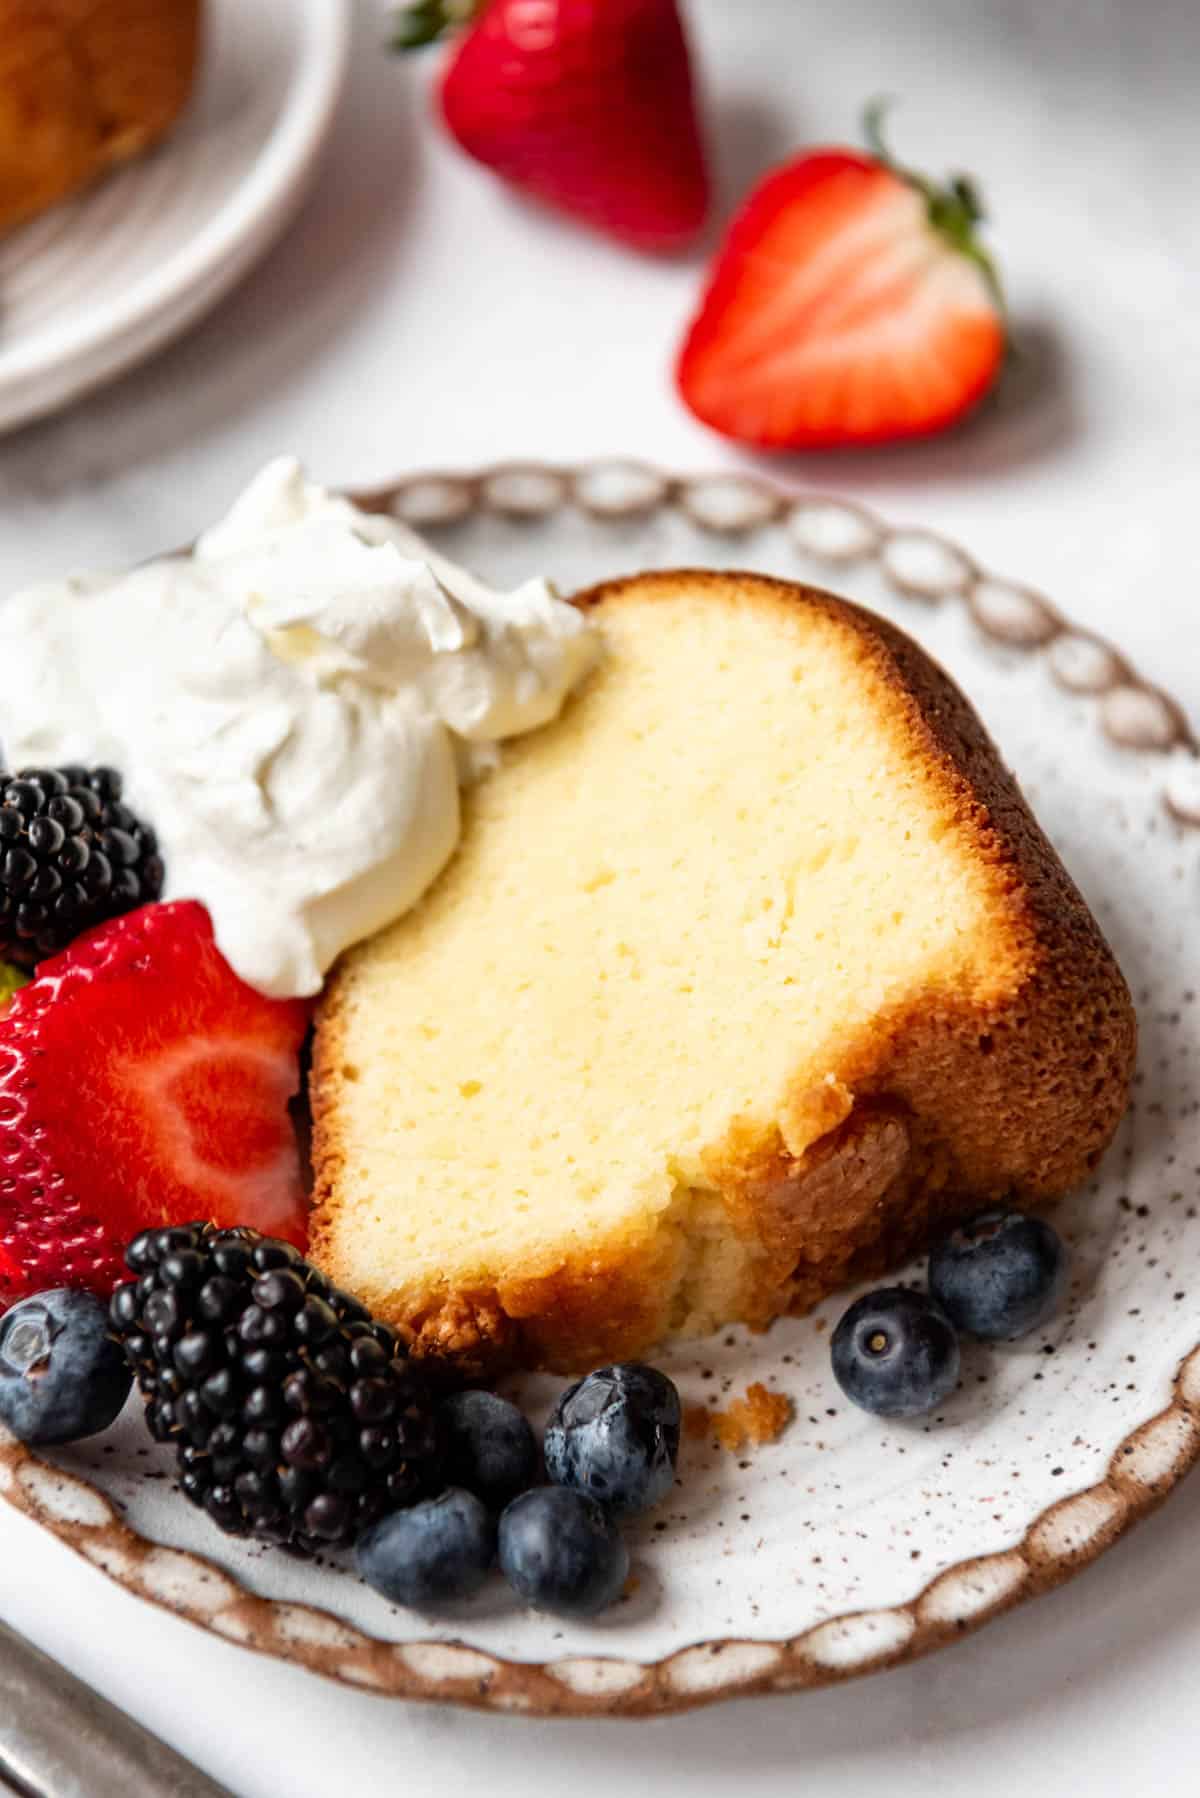 A slice of moist pound cake on a plate with fresh berries and cream.